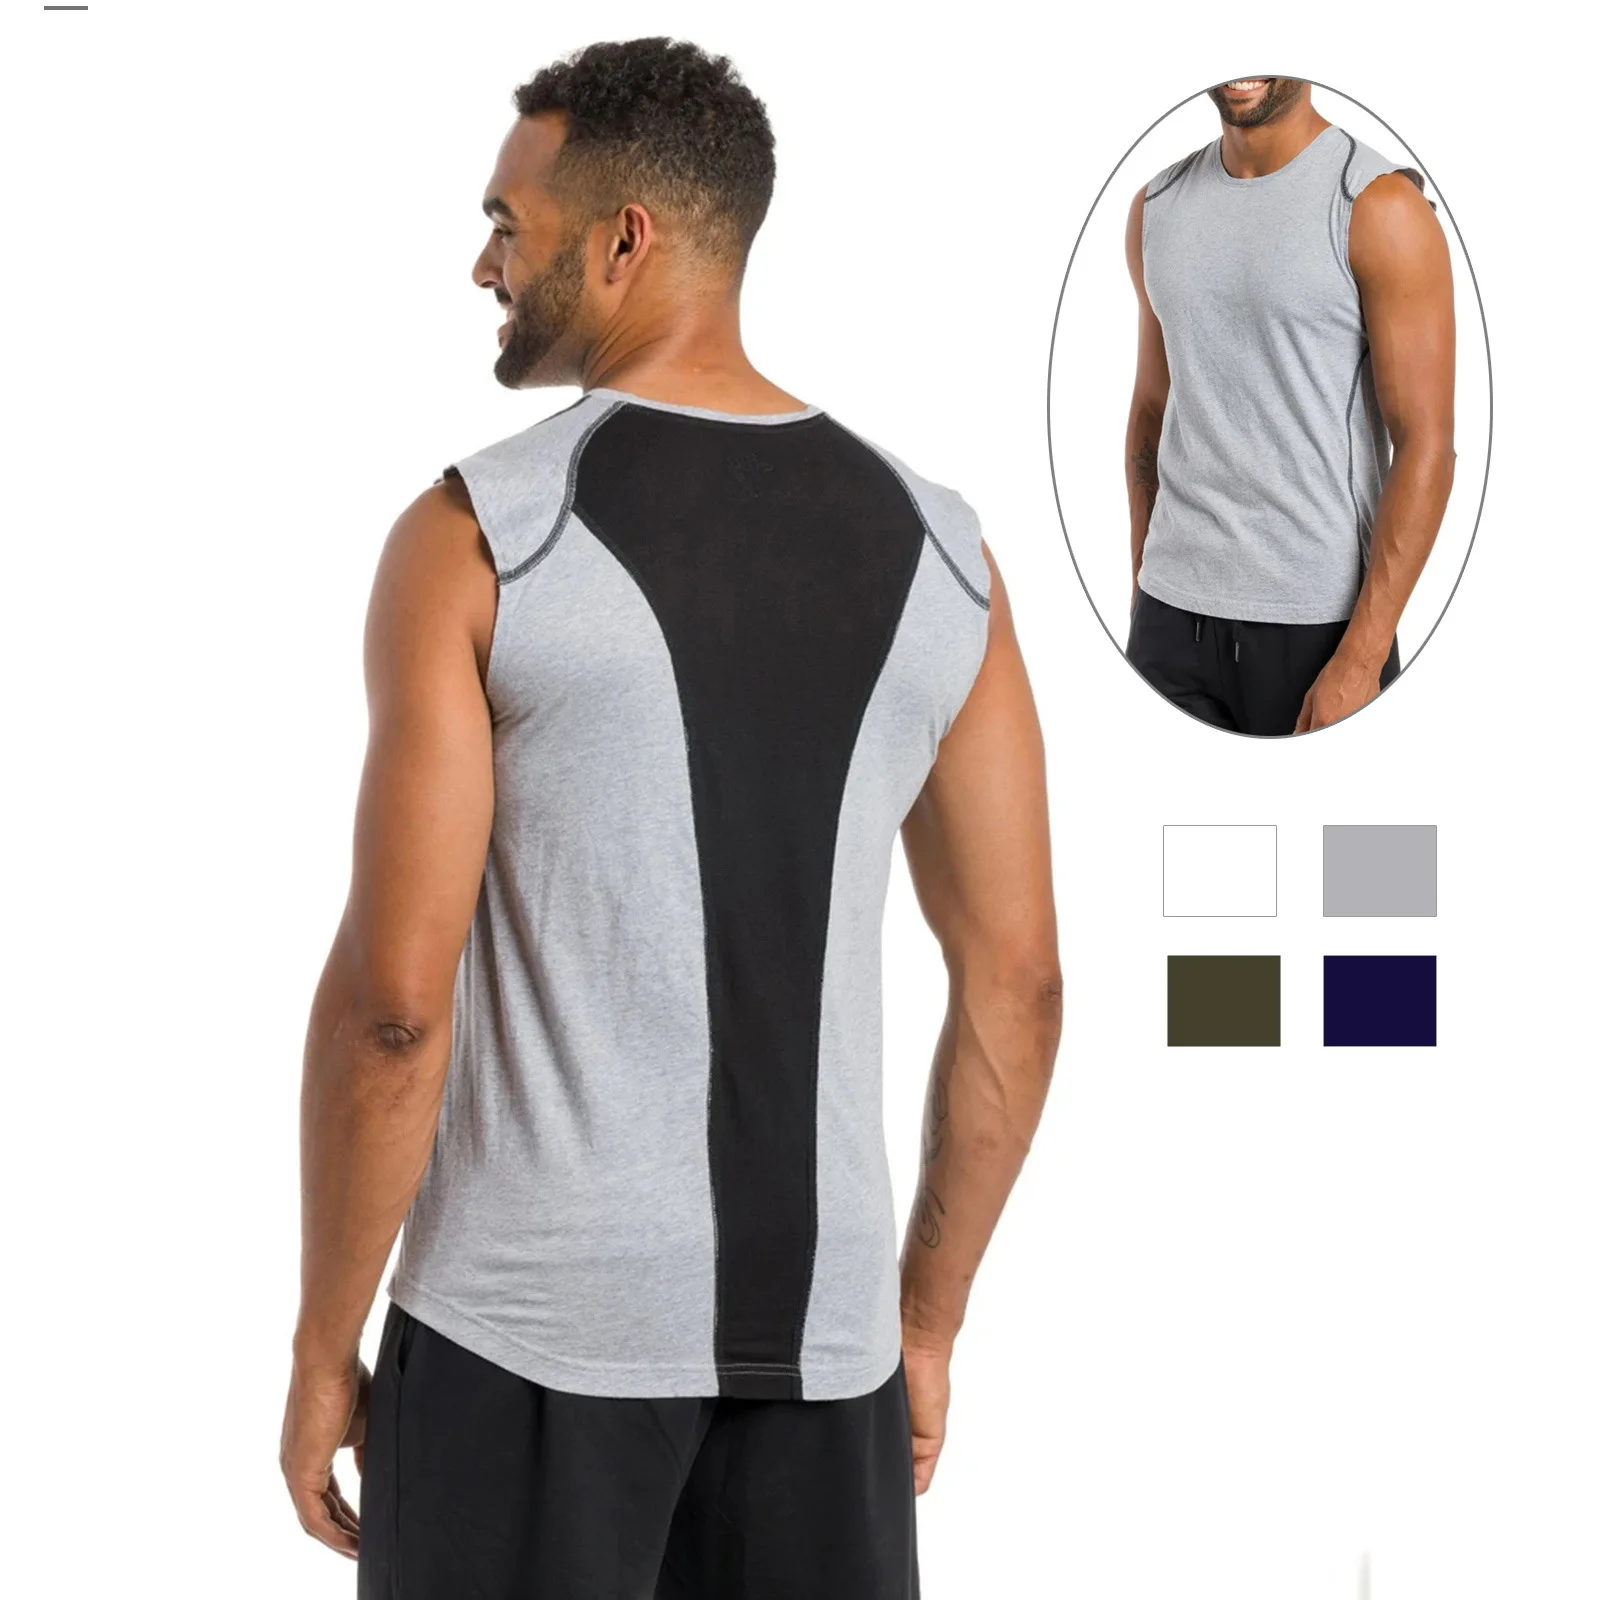 

Custom Logo Men Fitness Workout Vests Sleeveless Shirt Muscle Gym Mens Tank Tops Fitness Gym, White/ gray / army green /navy blue